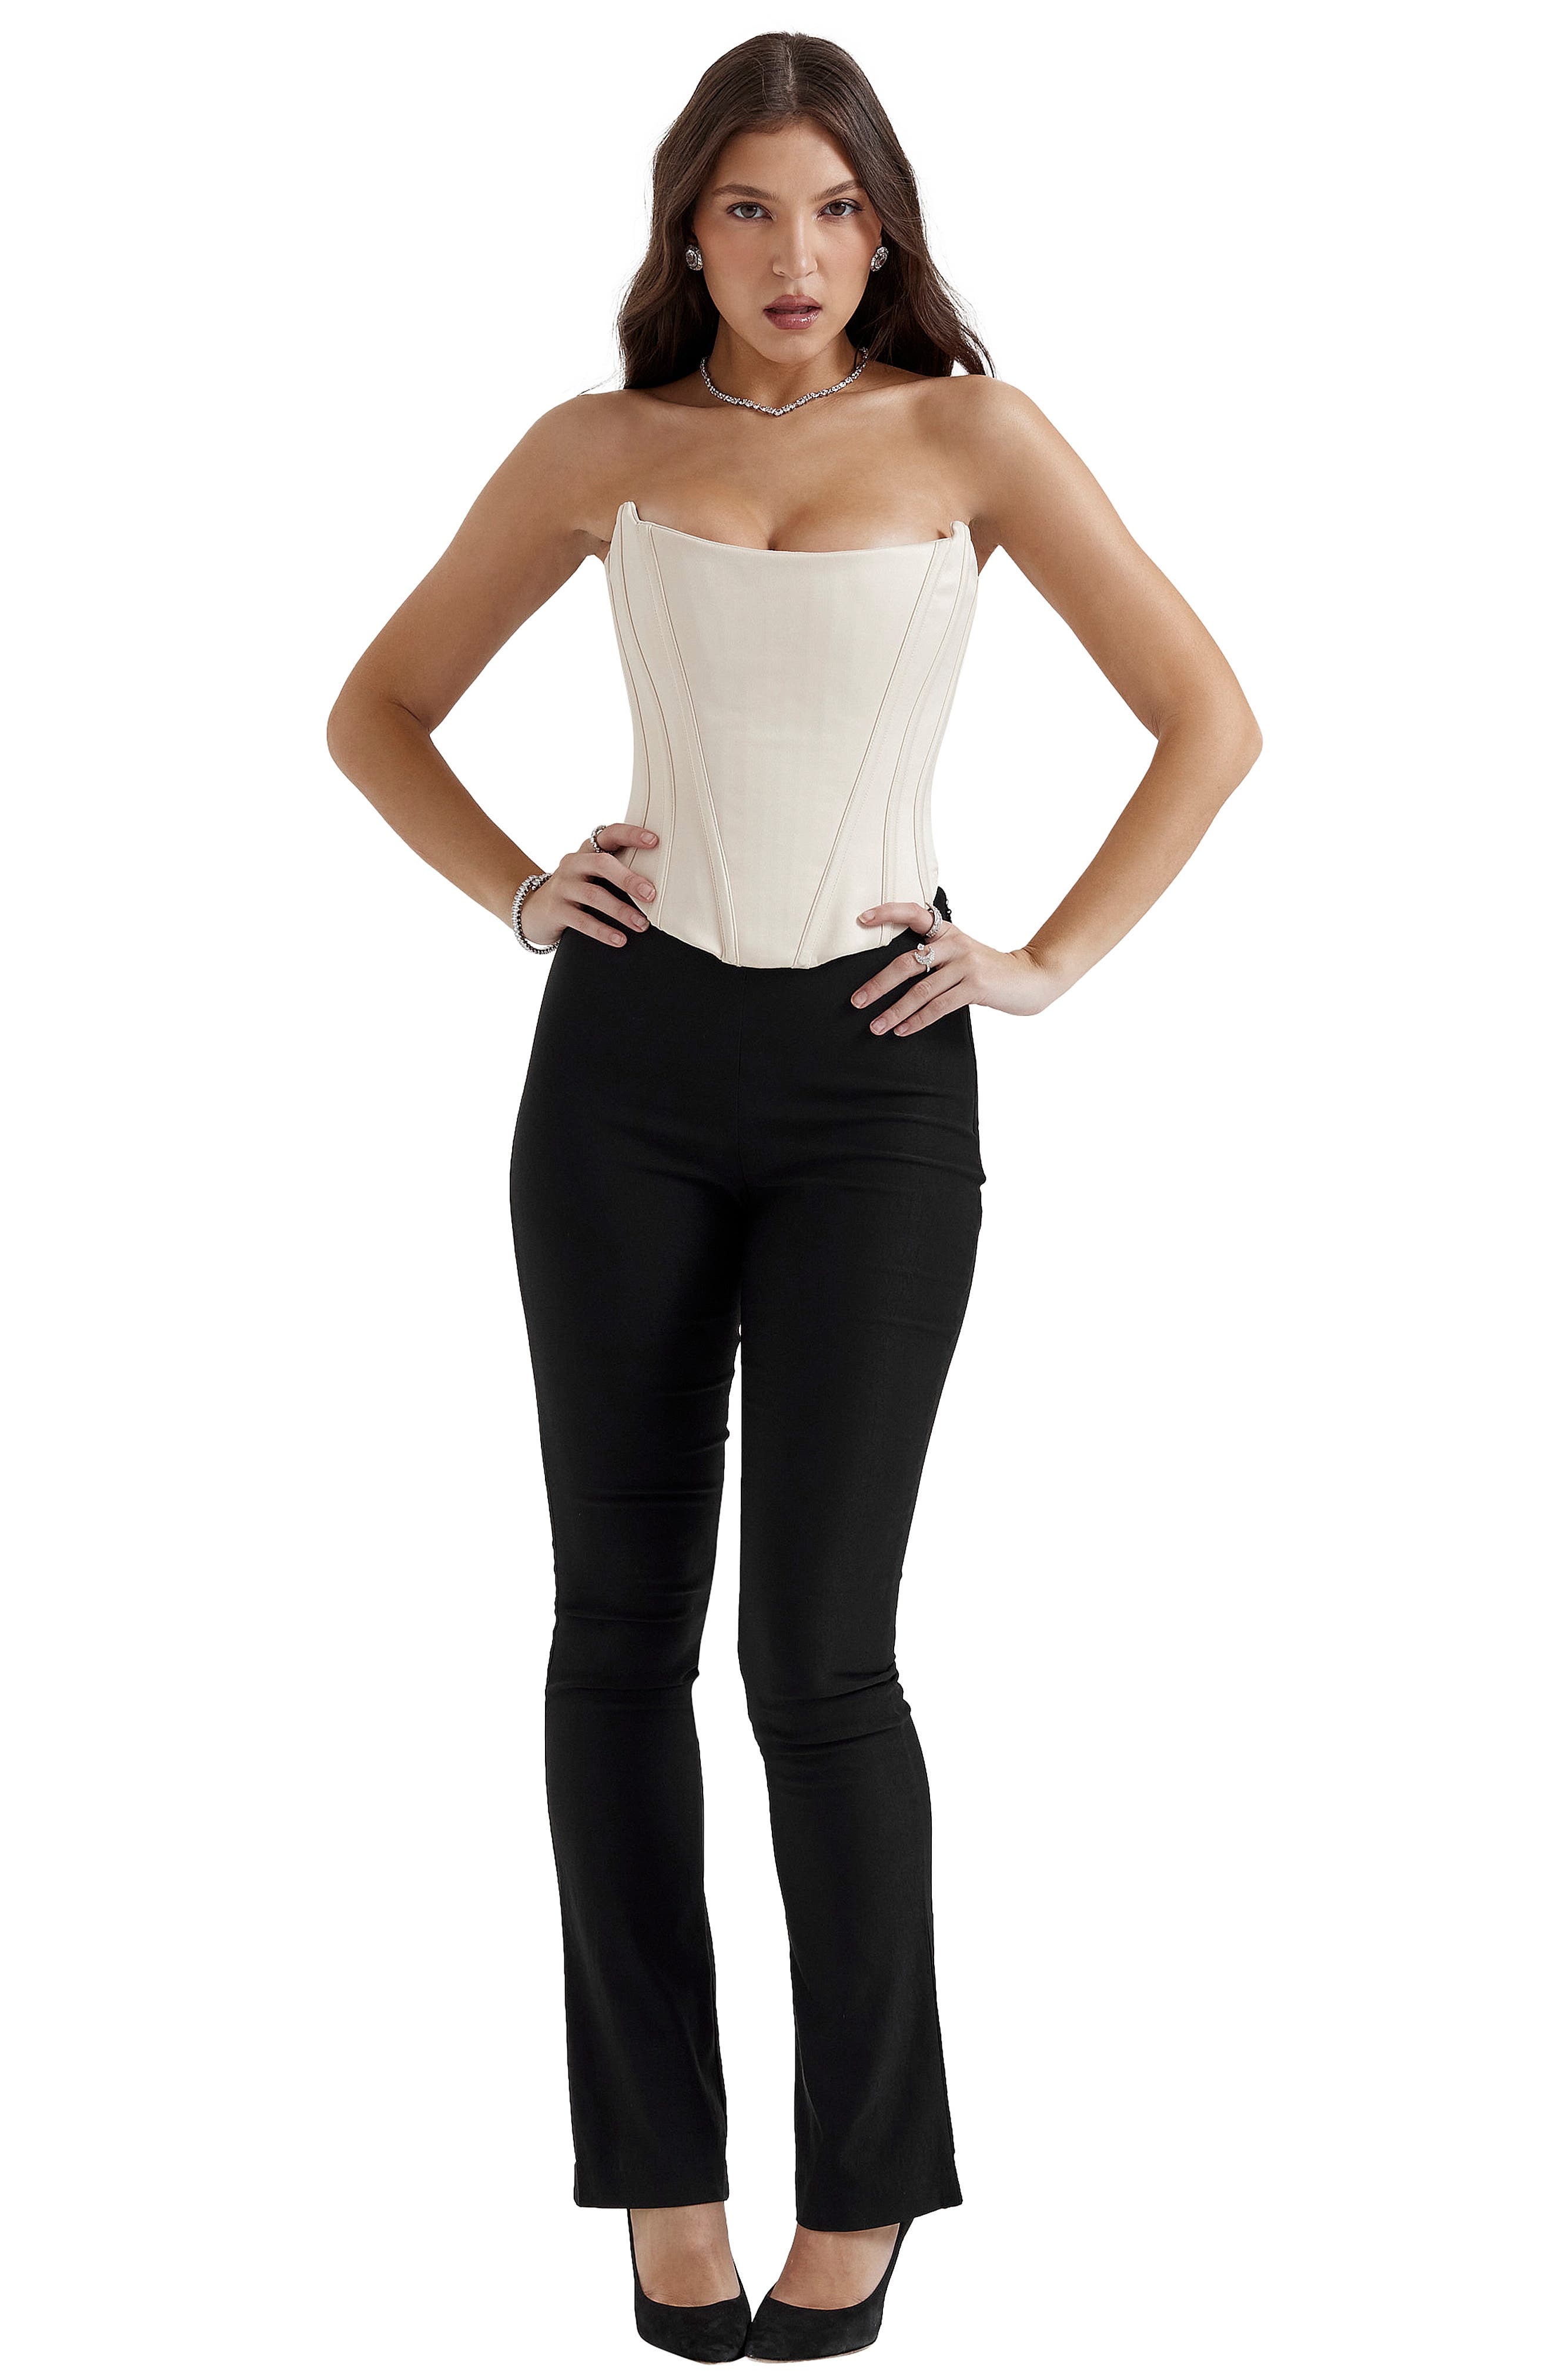 HOUSE OF CB Chicca Square Neck Corset Top, Nordstrom